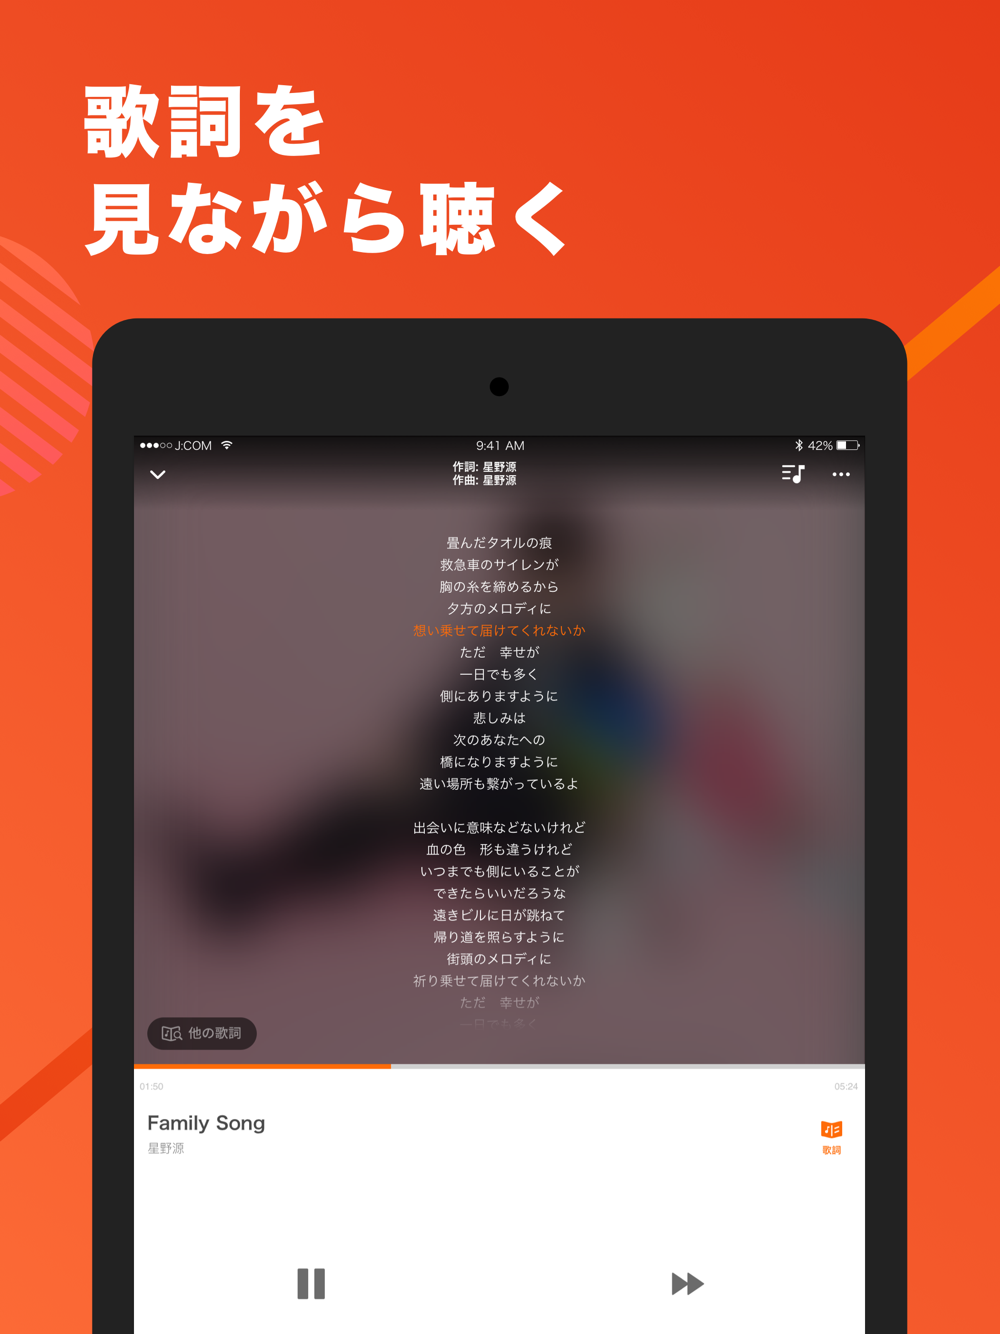 Jcomミュージック Powered By うたパス Free Download App For Iphone Steprimo Com